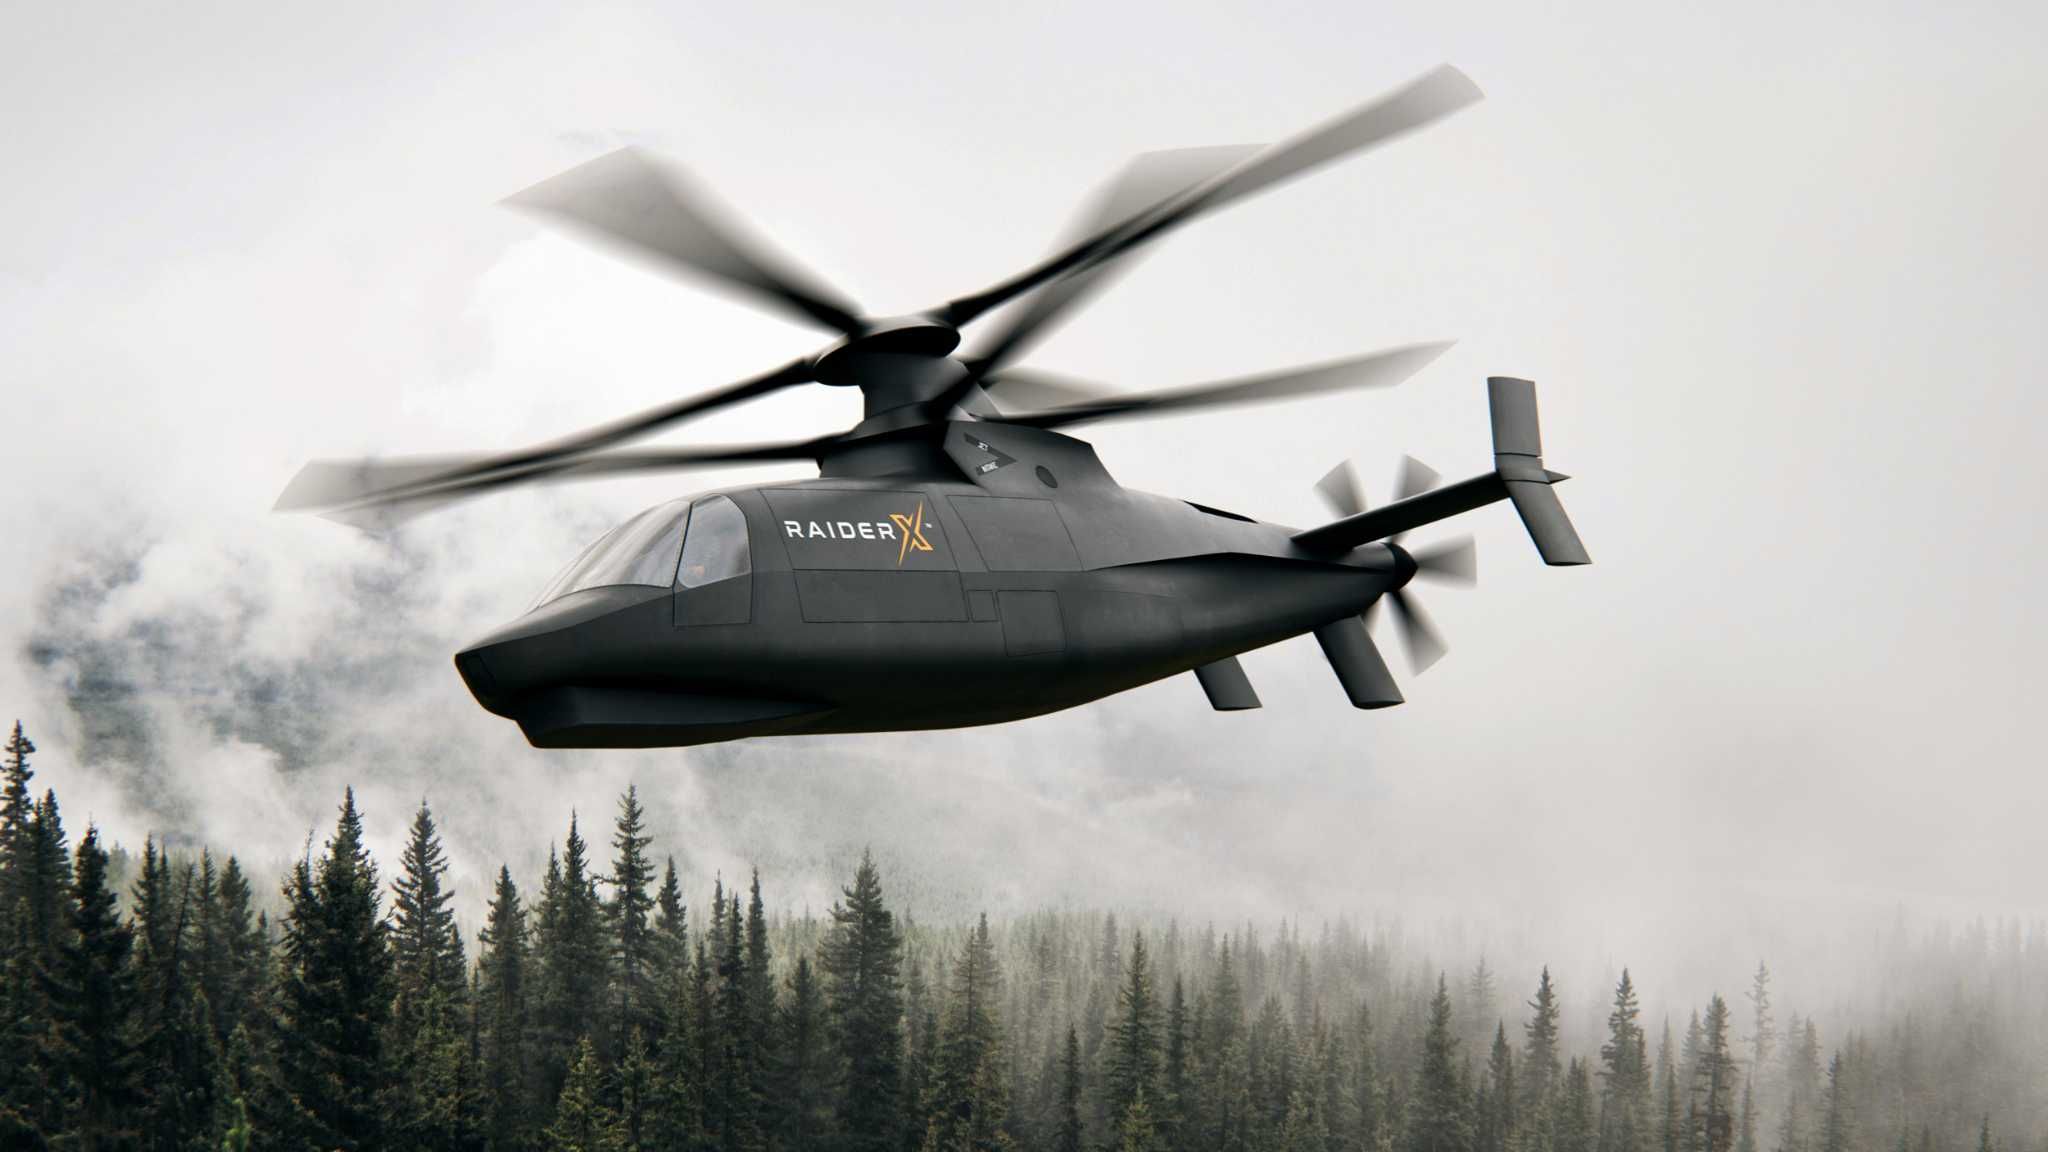 Lockheed Martin and Sikorsky debut new helicopter concept in Washington, D.C